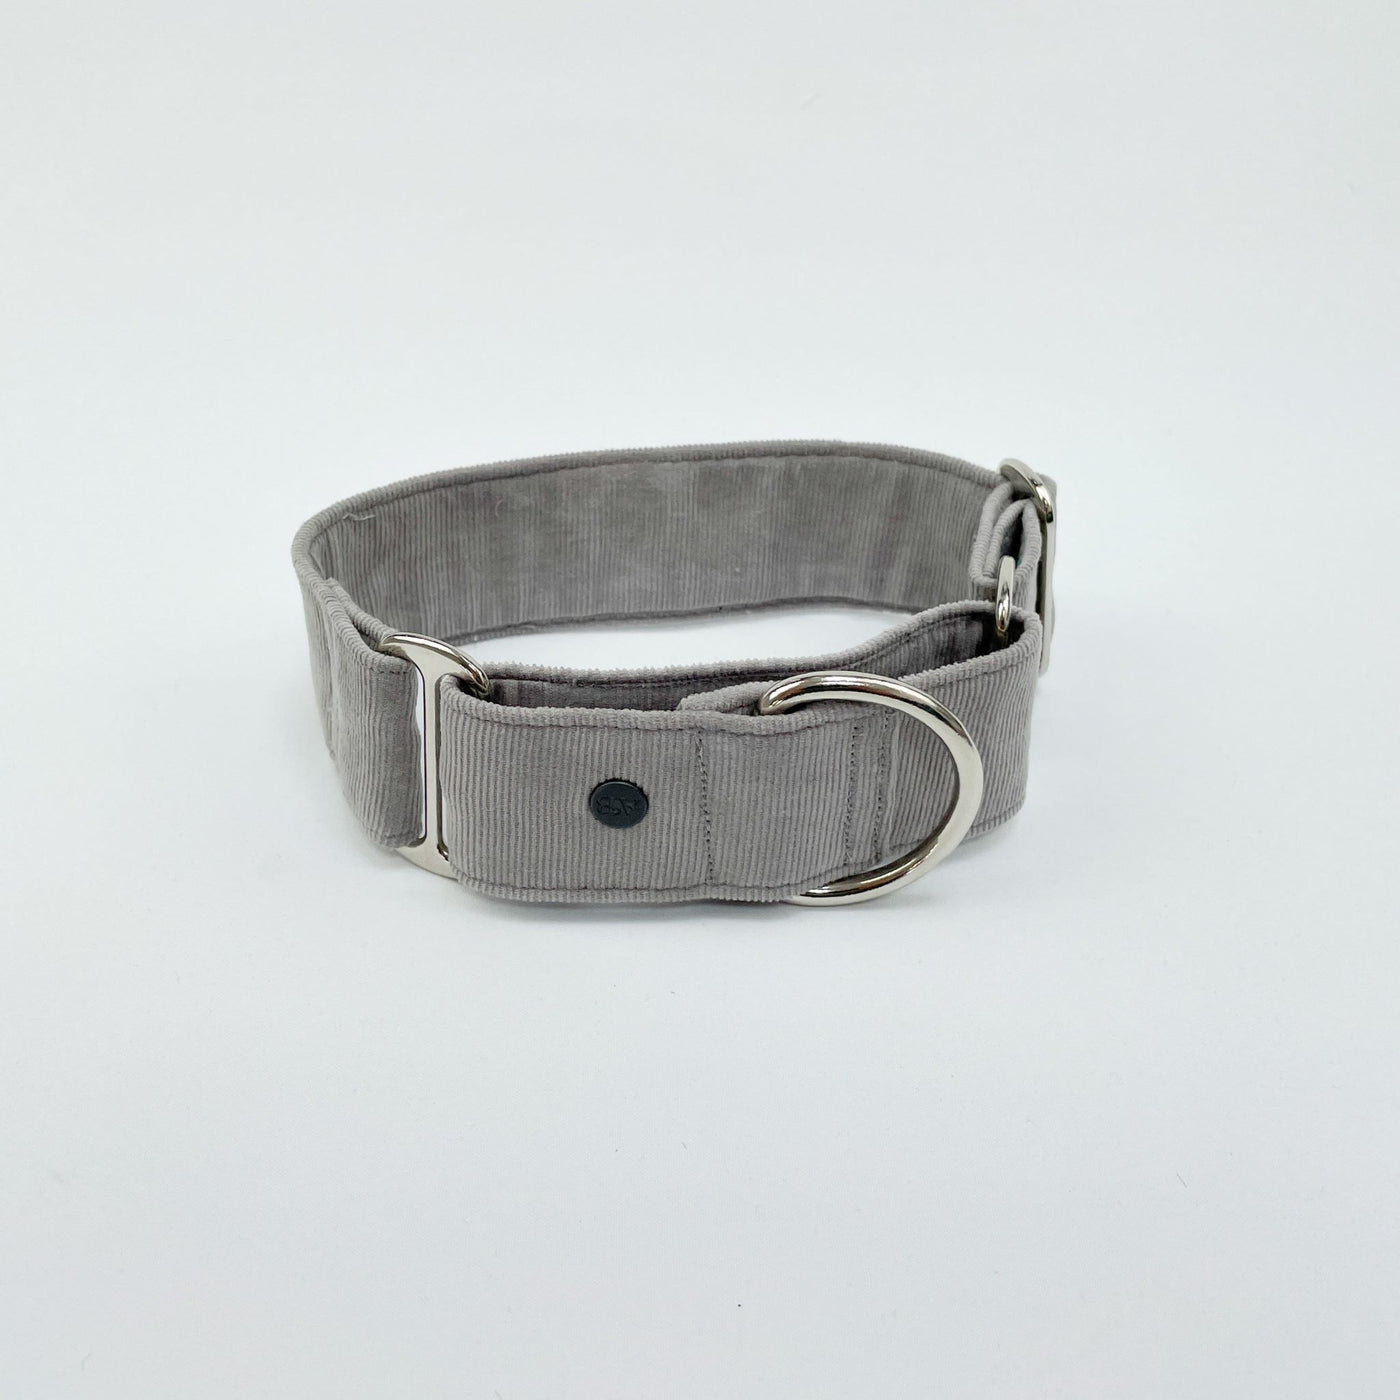 Silver Grey Corduroy Martingale Collar soft yet durable fabric.